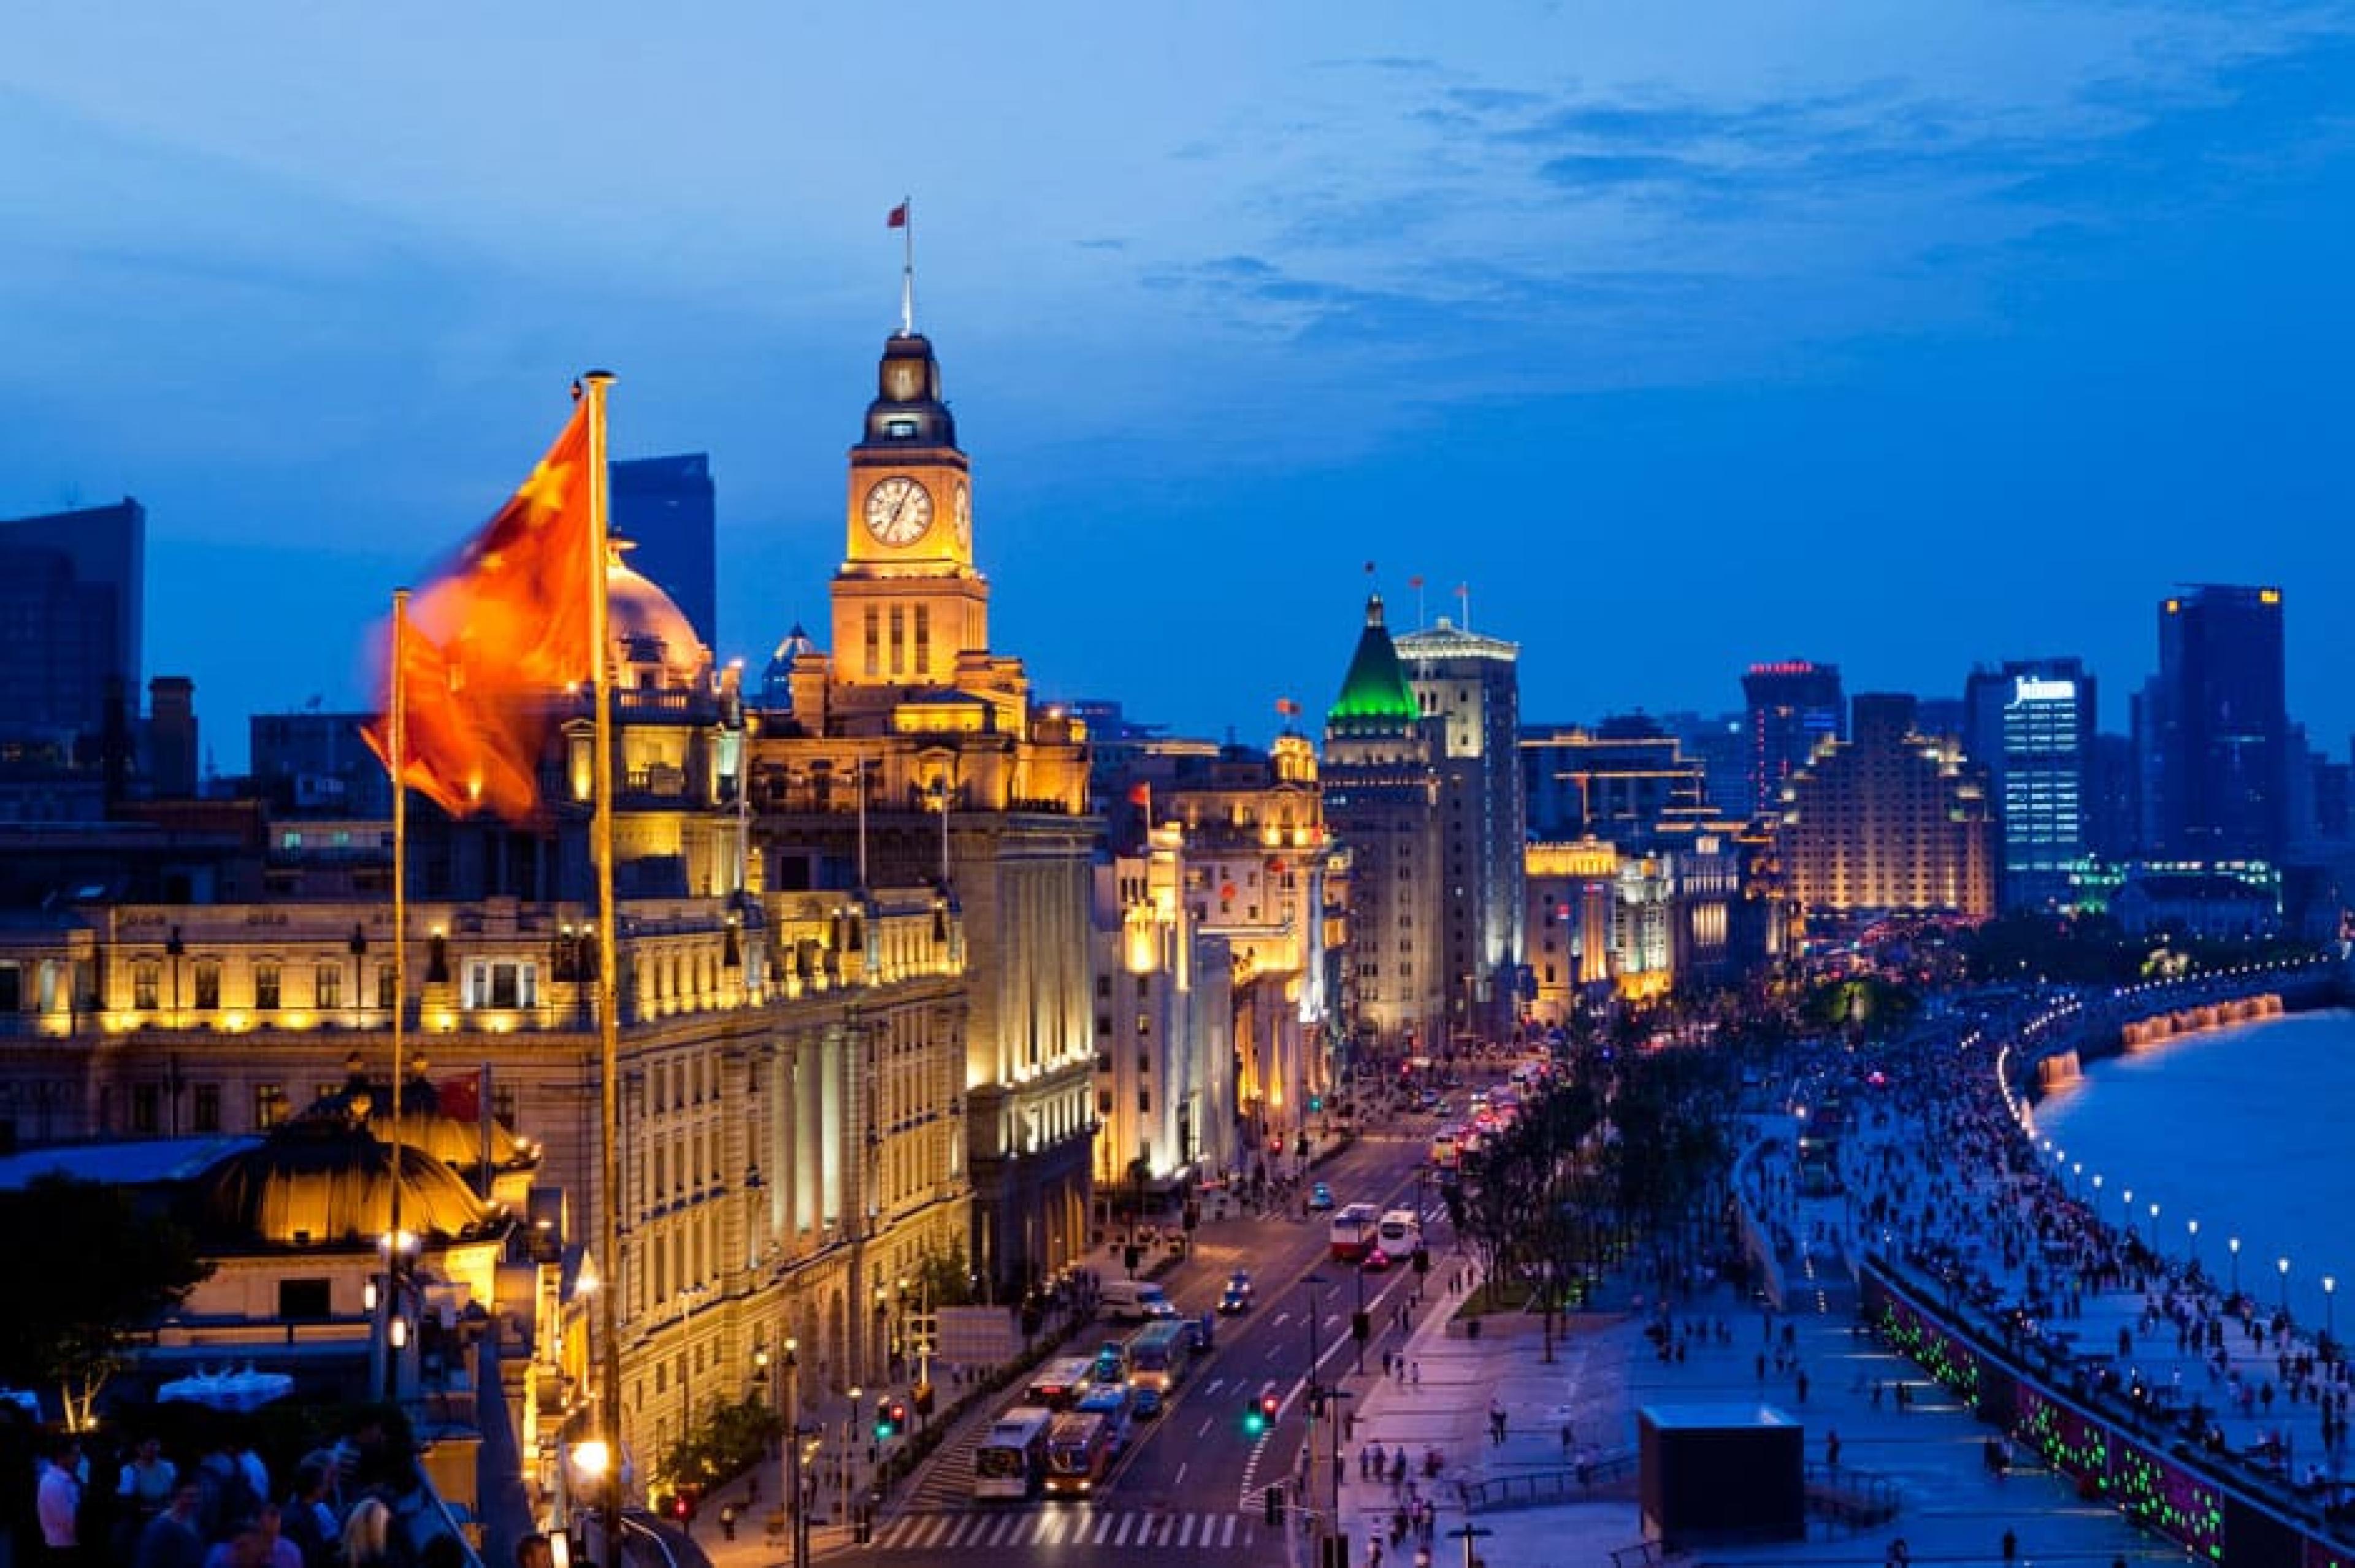 City landscape in evening - Shanghai, China - Courtesy of the Fairmont Peace Hotel